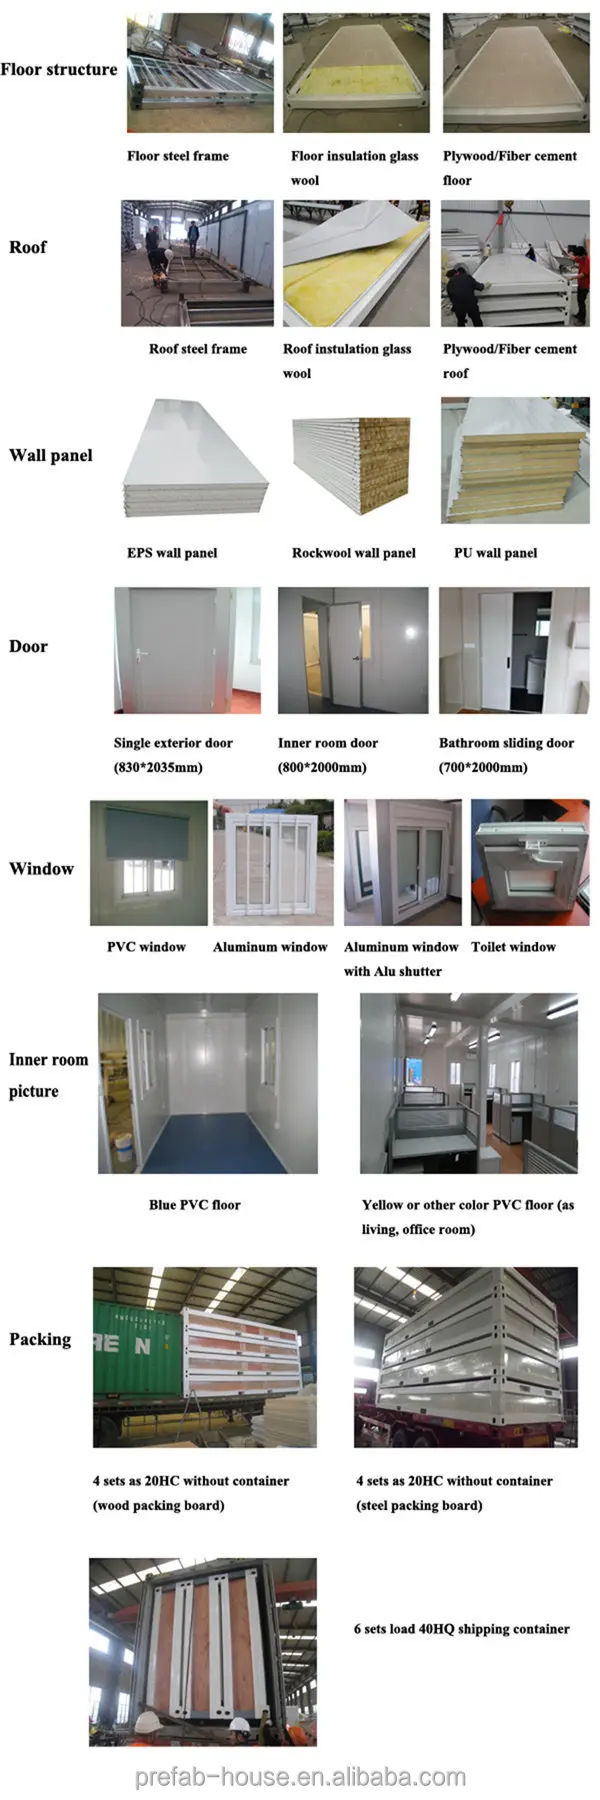 Lida Group Custom container ship price Suppliers used as office, meeting room, dormitory, shop-4